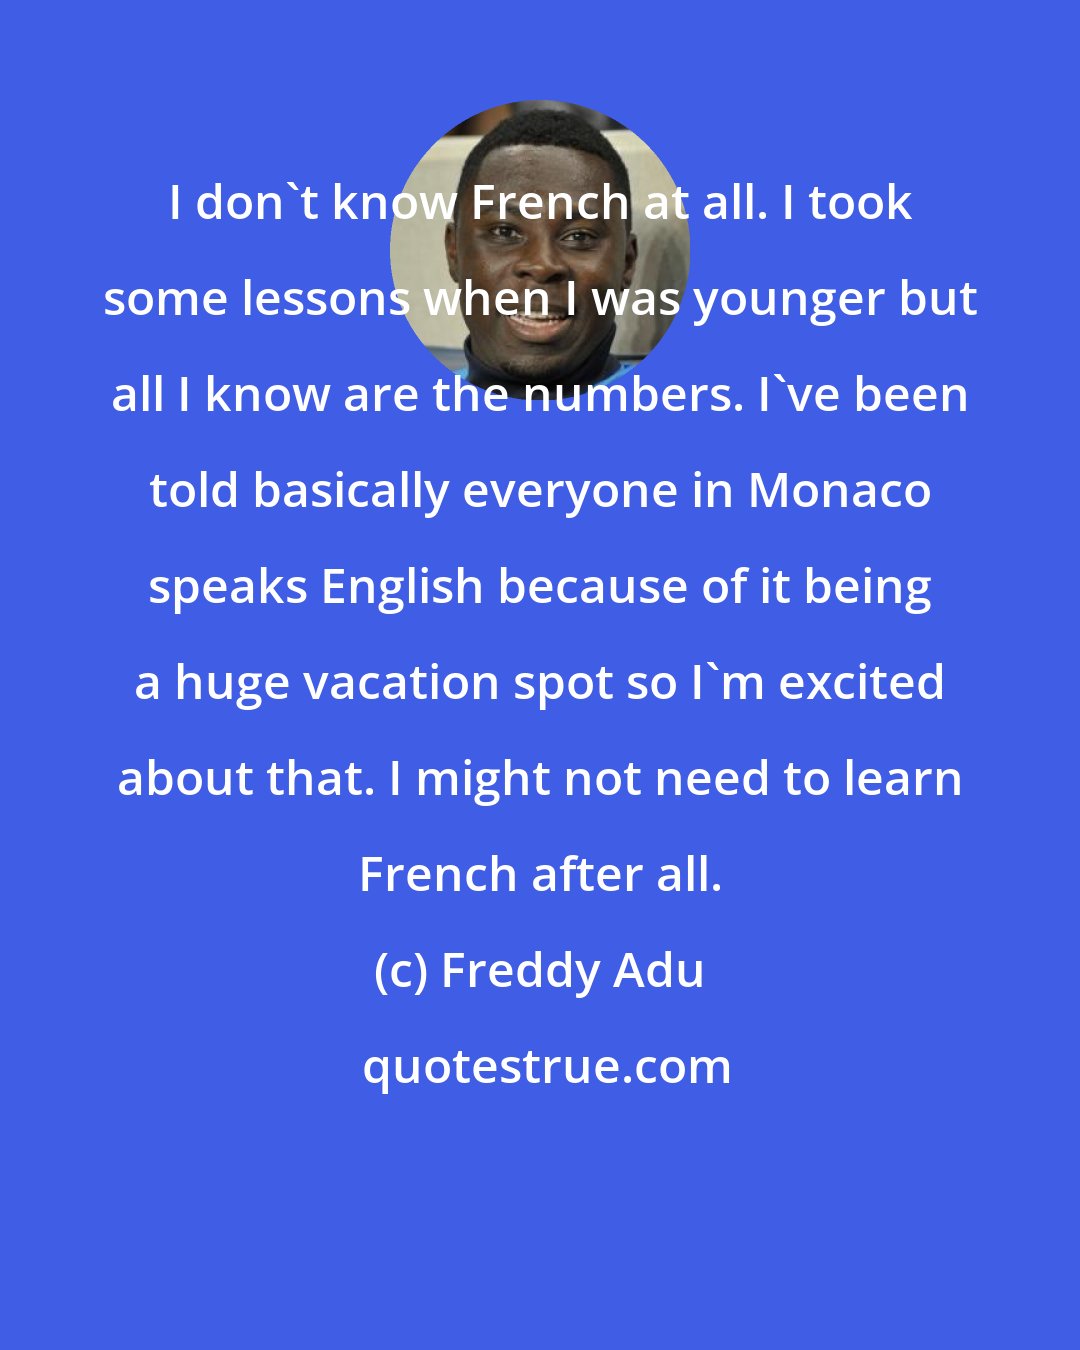 Freddy Adu: I don't know French at all. I took some lessons when I was younger but all I know are the numbers. I've been told basically everyone in Monaco speaks English because of it being a huge vacation spot so I'm excited about that. I might not need to learn French after all.